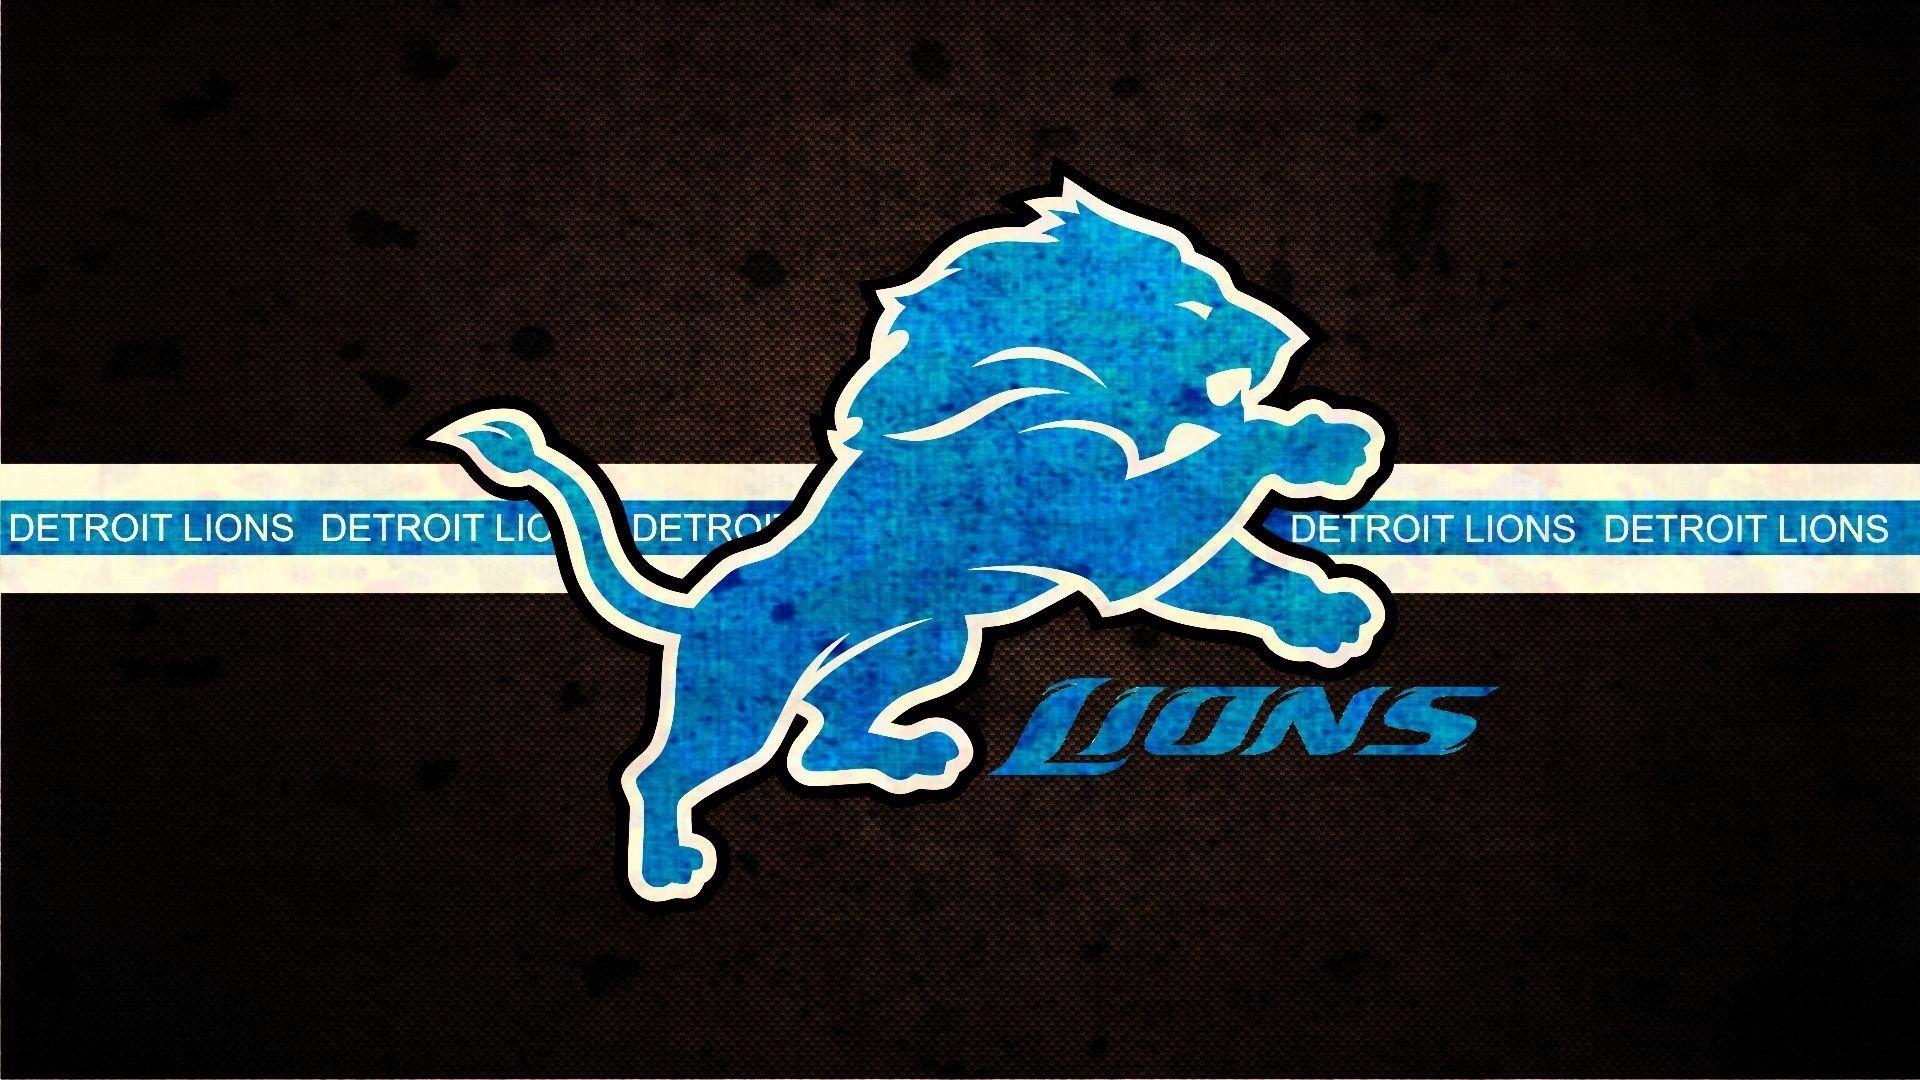 2023 Detroit Lions Game Balls 2023 NFL Mock Draft Ben Johnson 2.0 Lomas Brown Lions ticket prices Mel Kiper 2023 NFL Draft 2023 Detroit Lions 2023 NFL Schedule Rumor Ty Johnson New York Jets David Montgomery Chicago Bears Chase Young Jared Goff Amon-Ra St. Brown 2023 NFL Top 100 Bill Barnwell